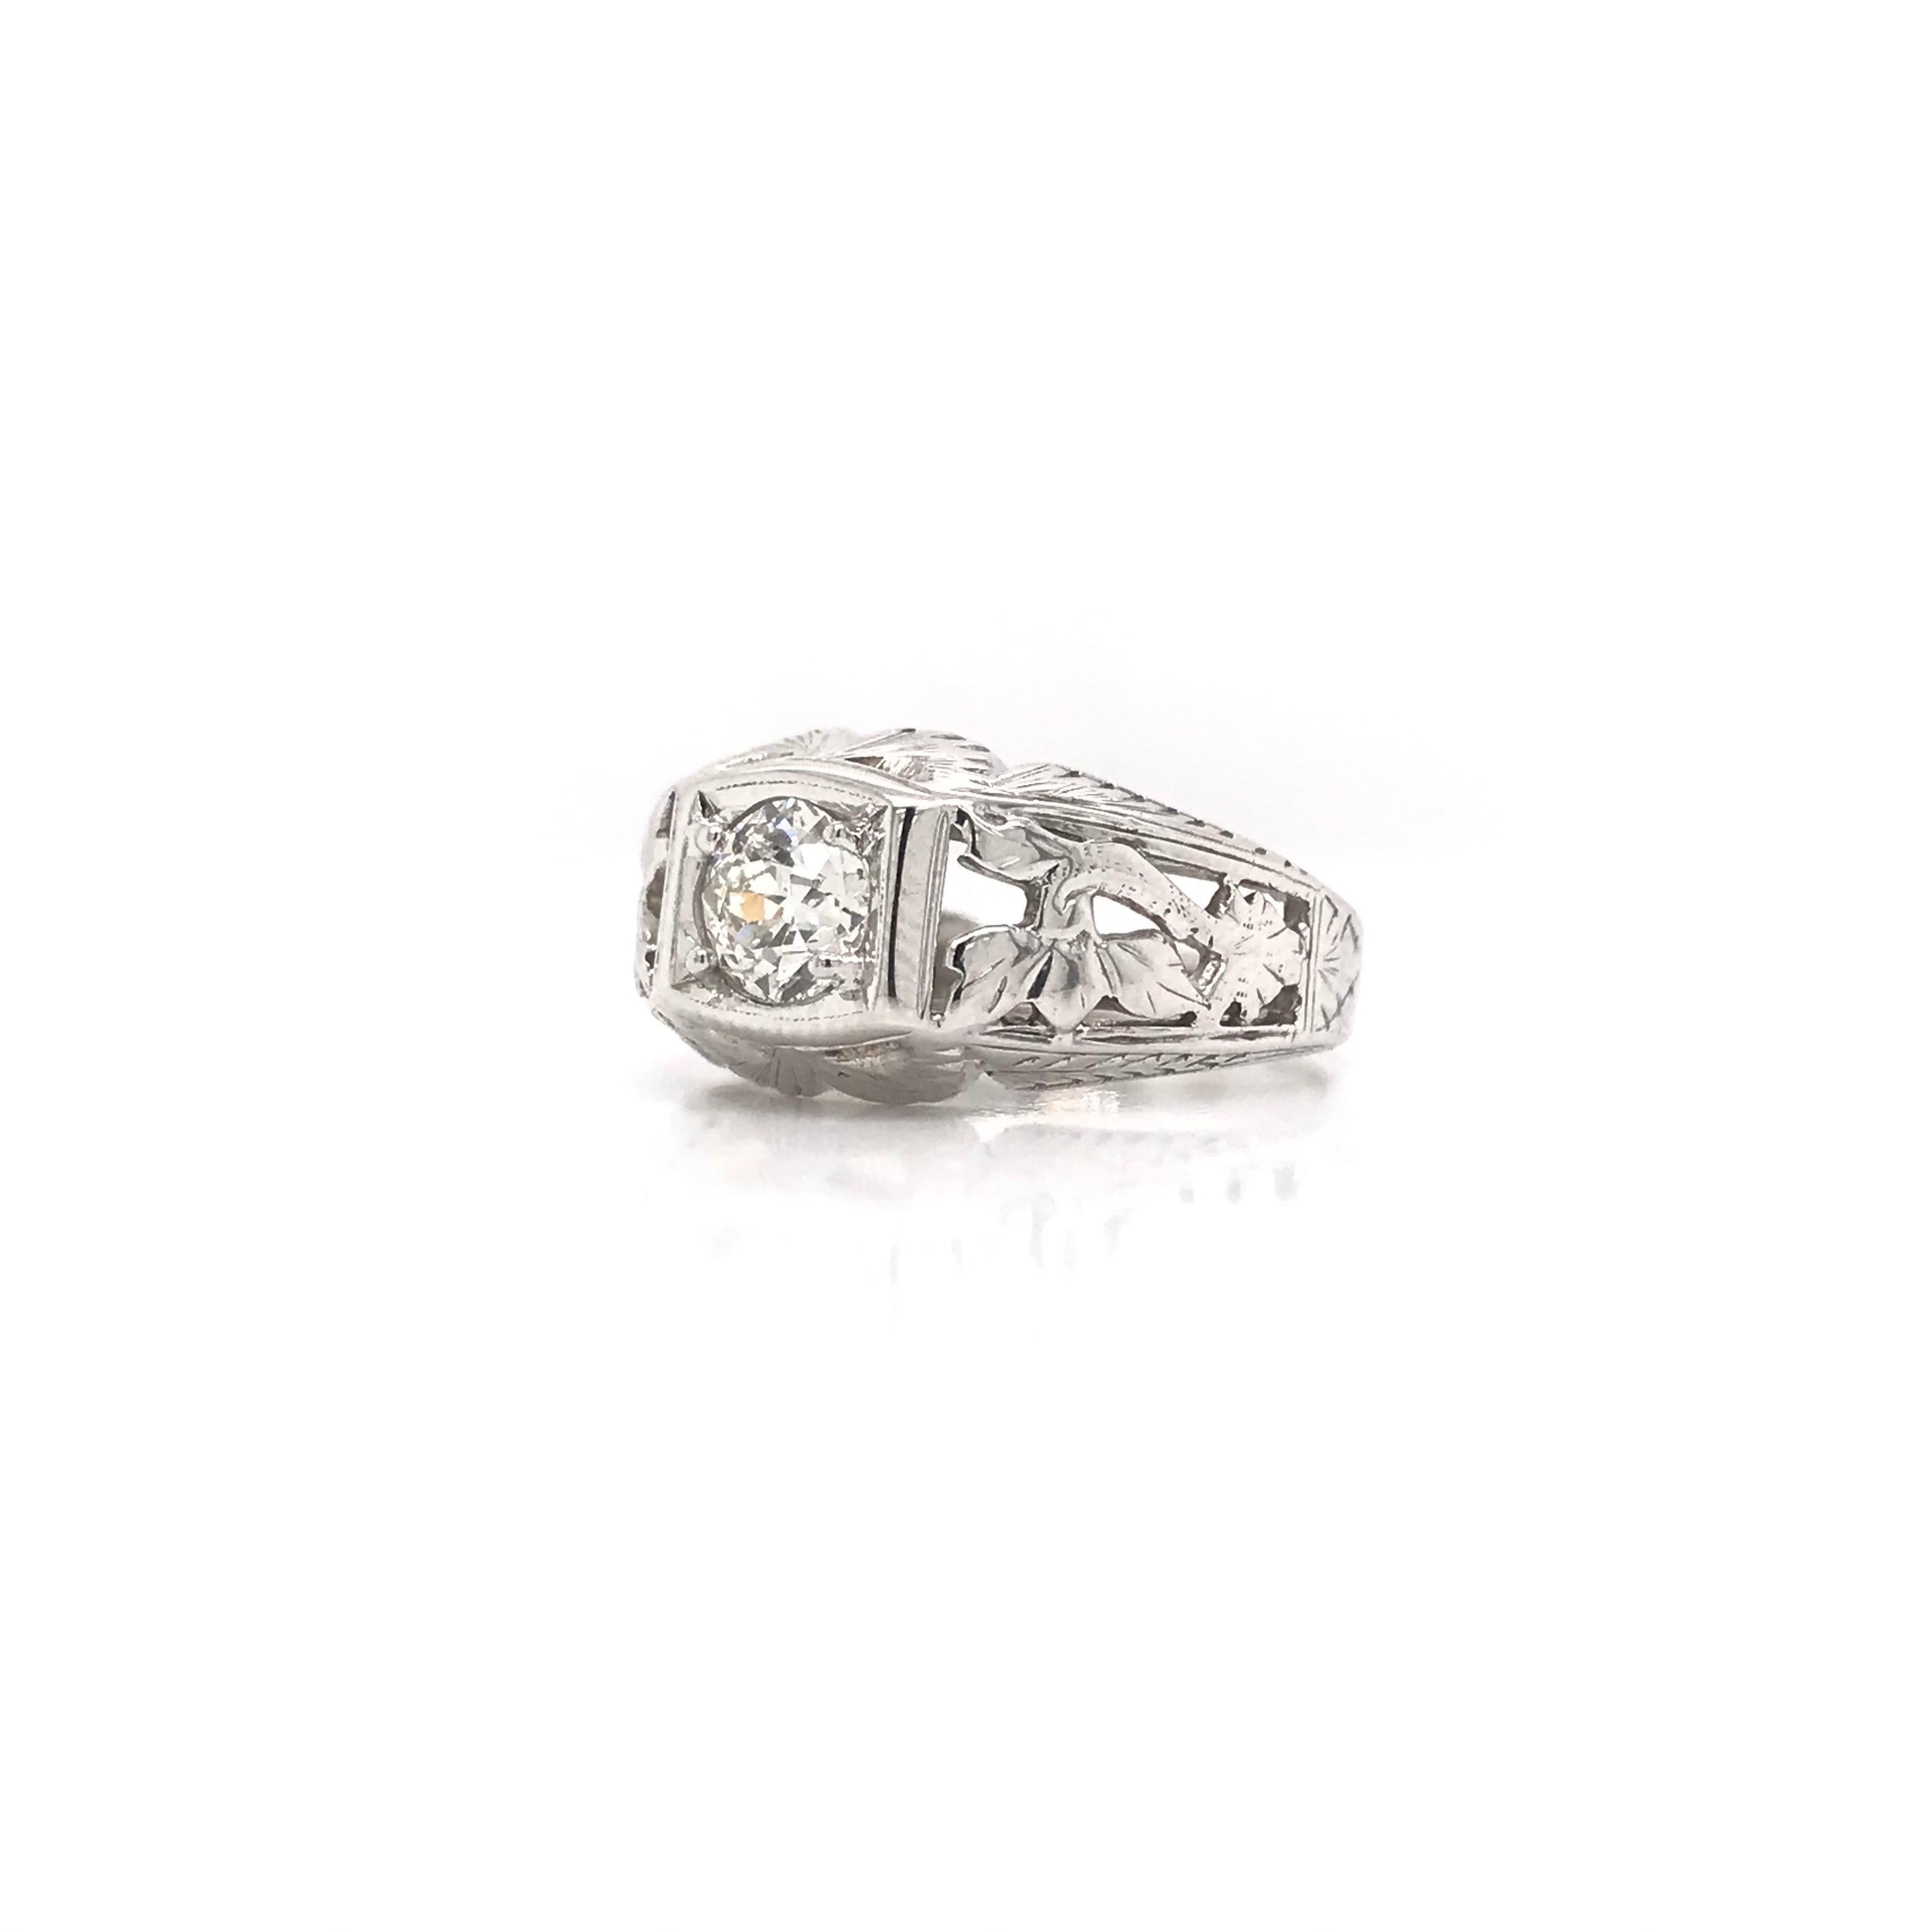 This unique antique piece was handcrafted sometime during the Art Deco design period ( 1920-1940 ). The filigree setting is 18k white gold and features a 0.61 carat old mine cut diamond. The diamond grades J color & approximately SI2 in clarity. The